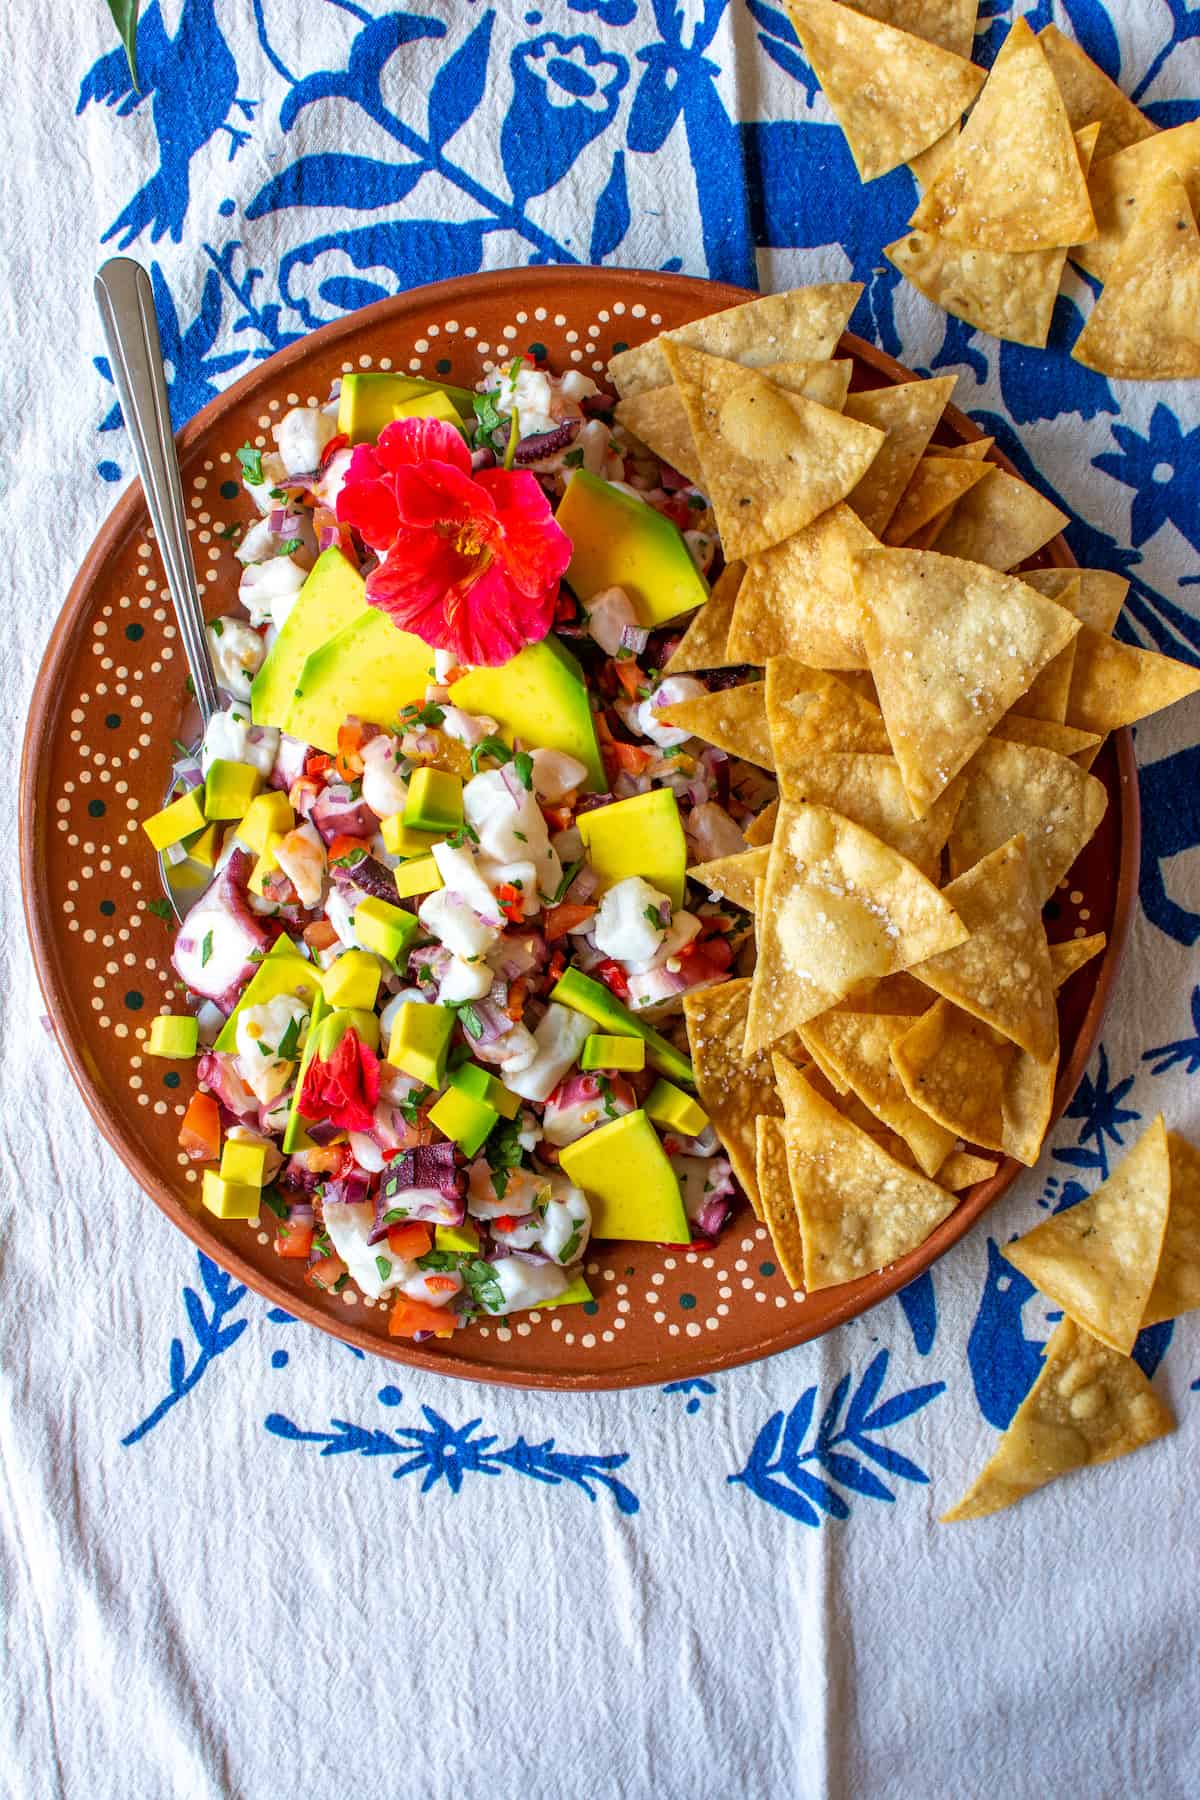 A terracotta plate filled with seafood ceviche and tortilla chips sitting on a blue and white tablecloth.